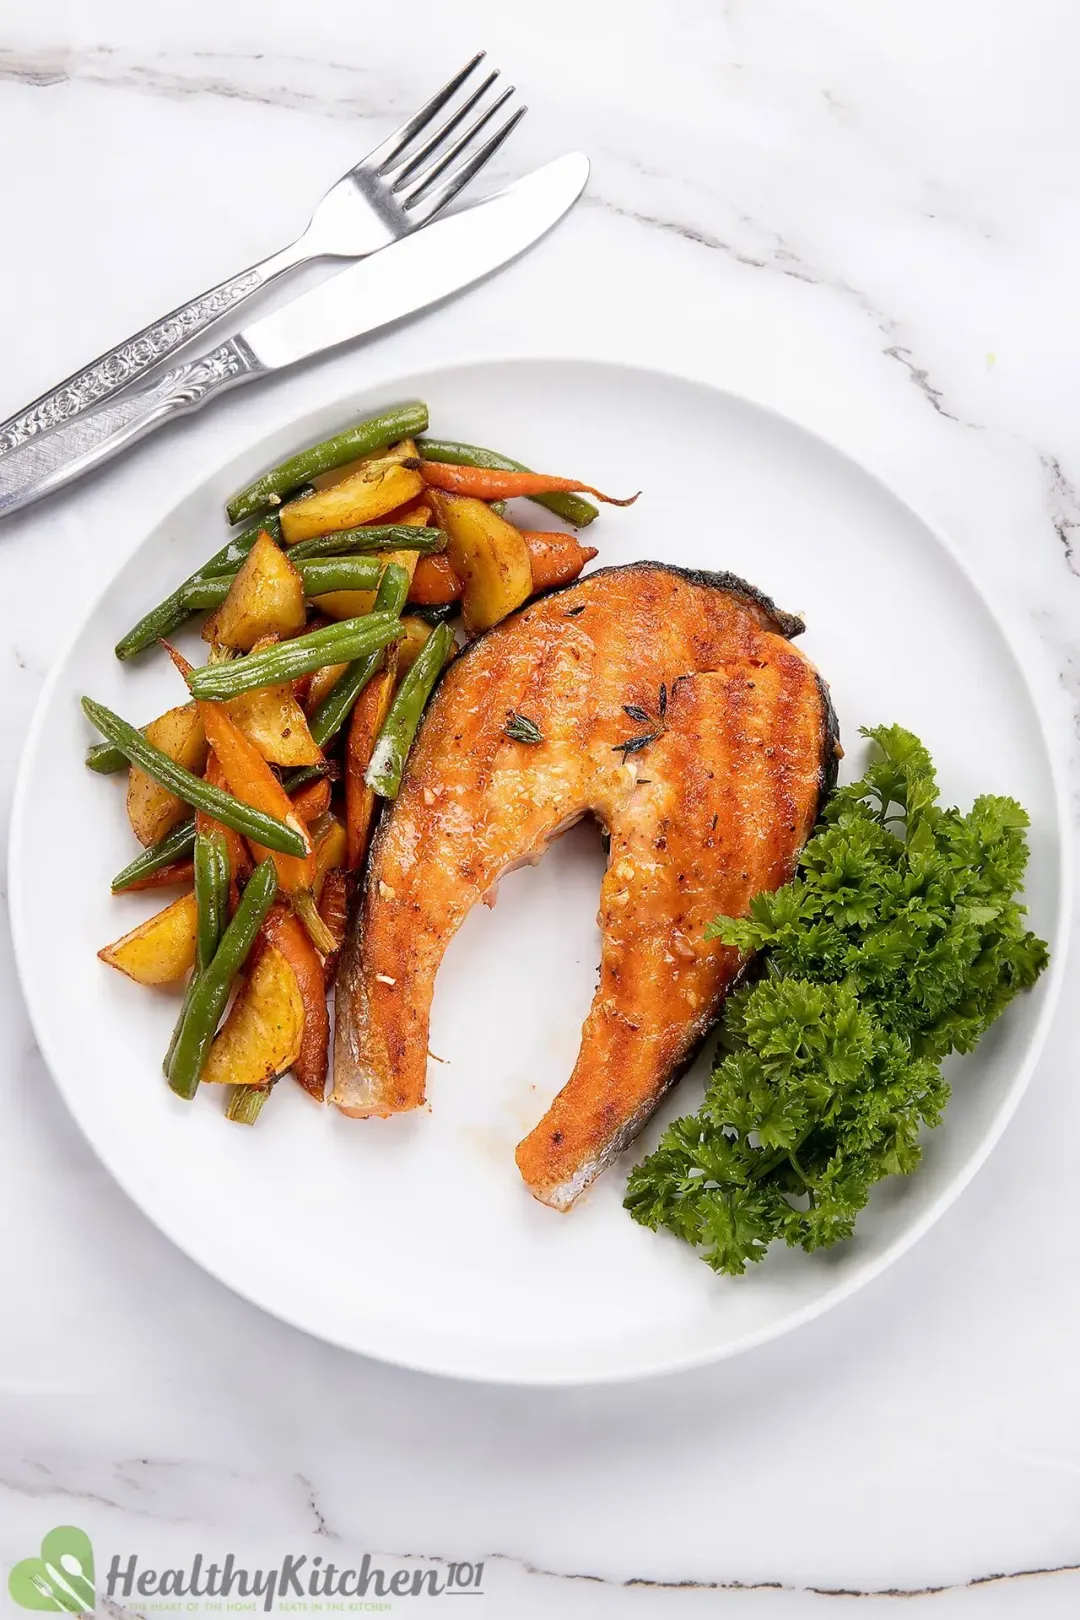 Salmon Steak Recipe: A Healthy, Nutritious Meal Made in 40 Minutes [Video]